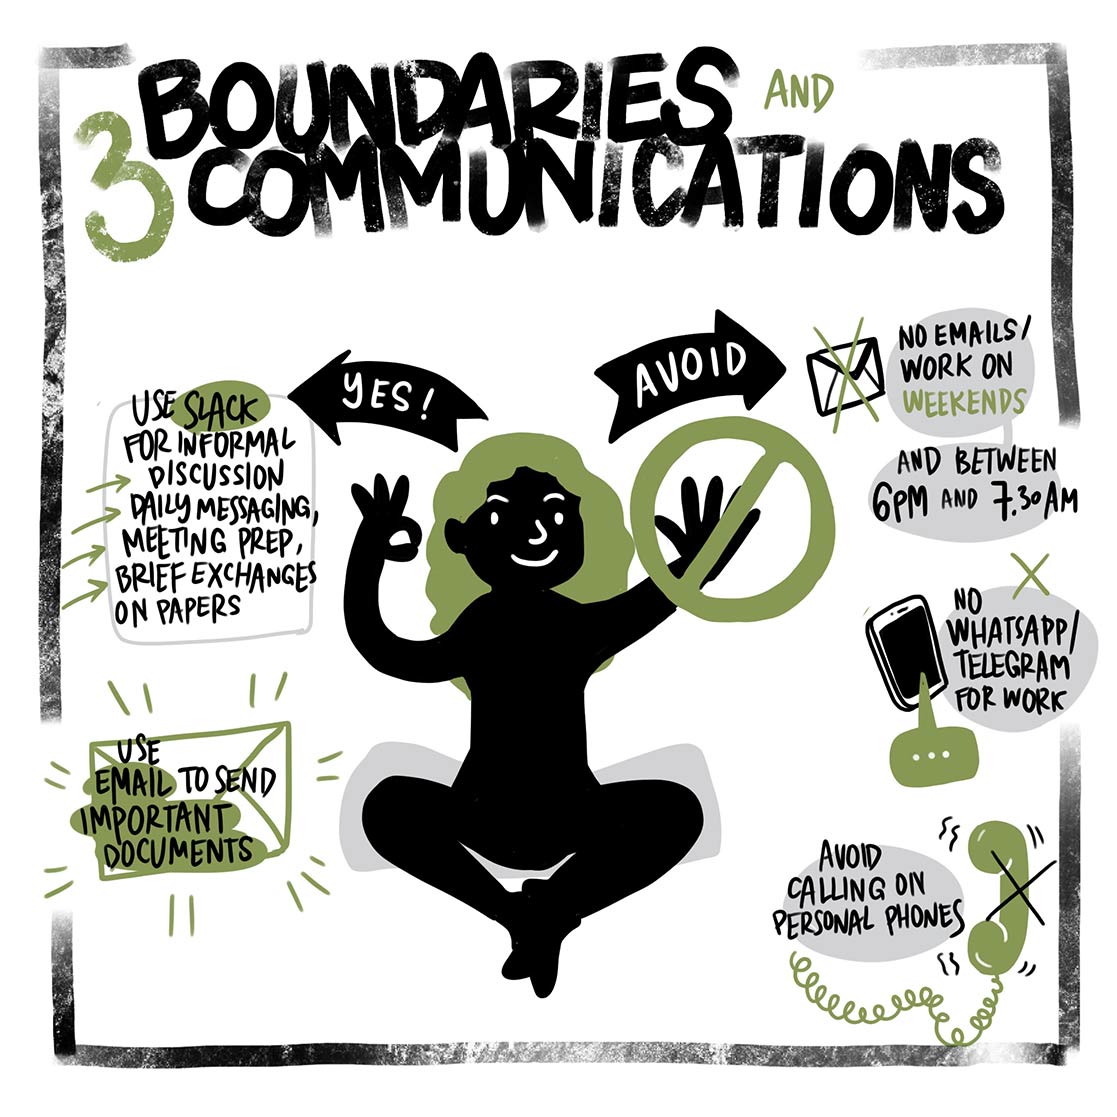 3. Setting boundaries for how we communicate with each other